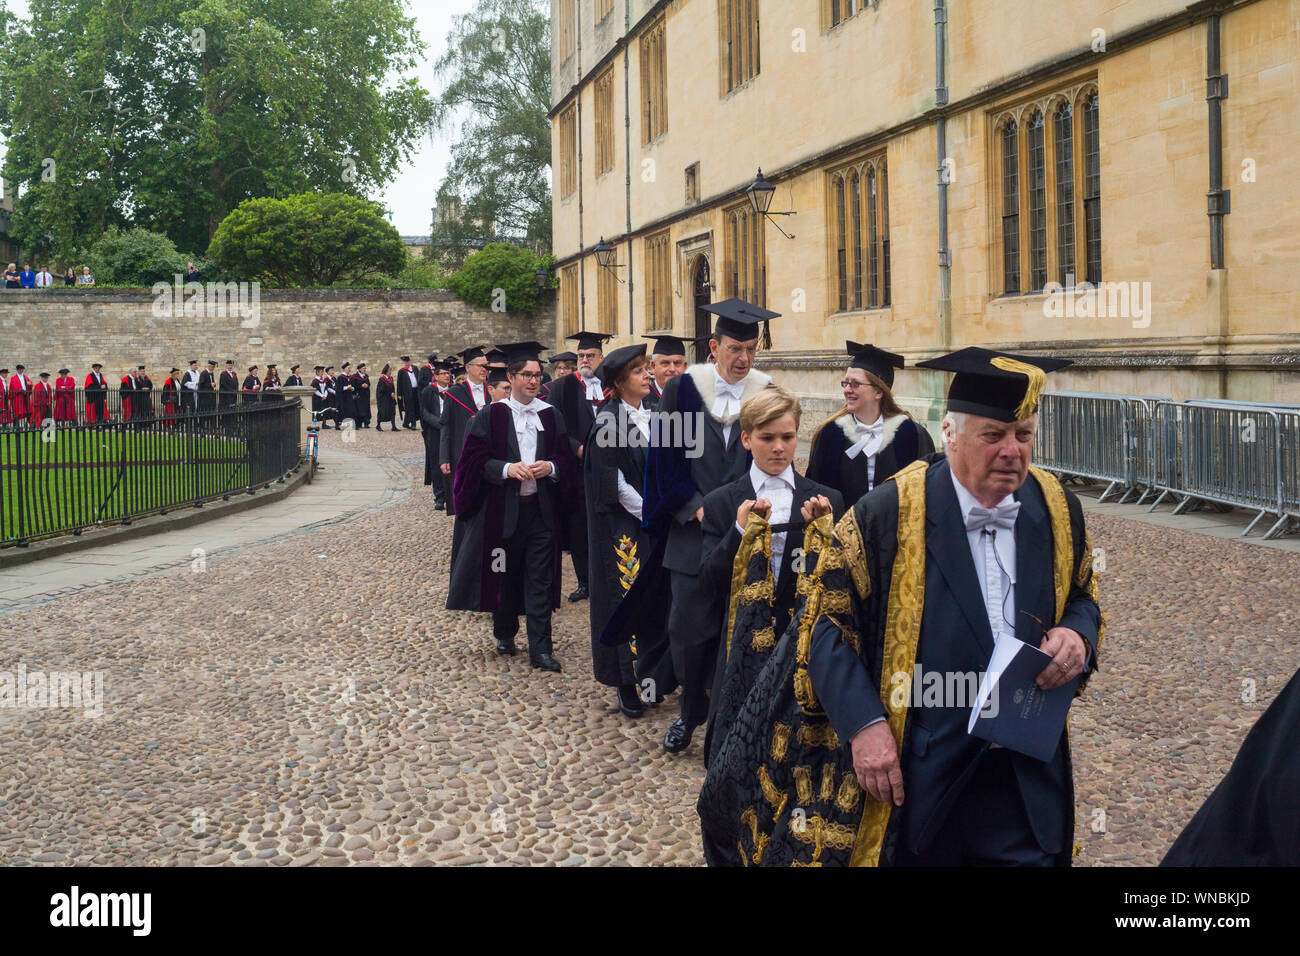 The annual Encaenia Procession by the Bodleian Library with the Chancellor of Oxford University, Chris Patten, The Rt Hon The Lord Patten of Barnes Stock Photo